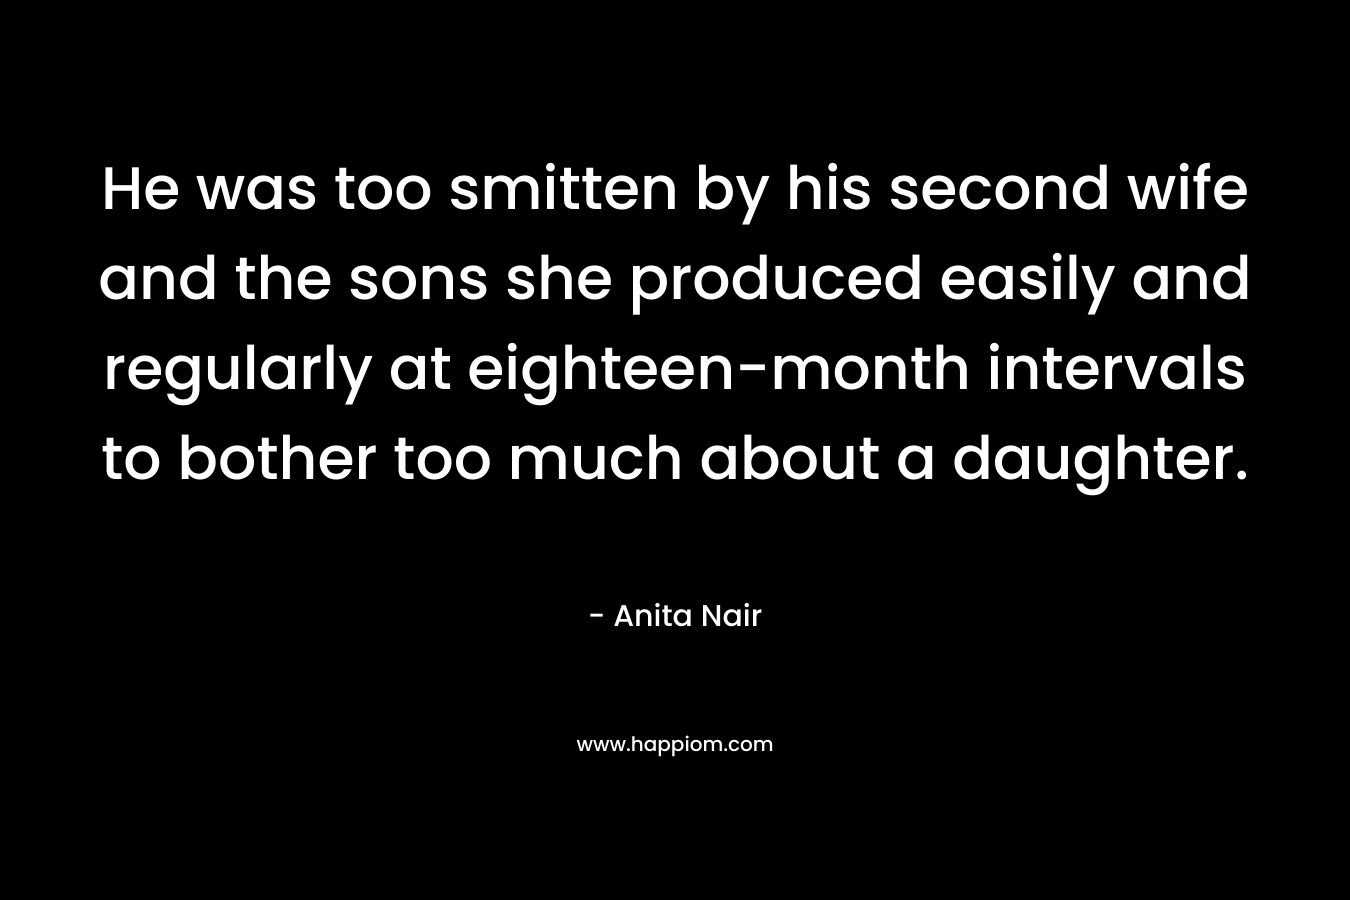 He was too smitten by his second wife and the sons she produced easily and regularly at eighteen-month intervals to bother too much about a daughter. – Anita Nair